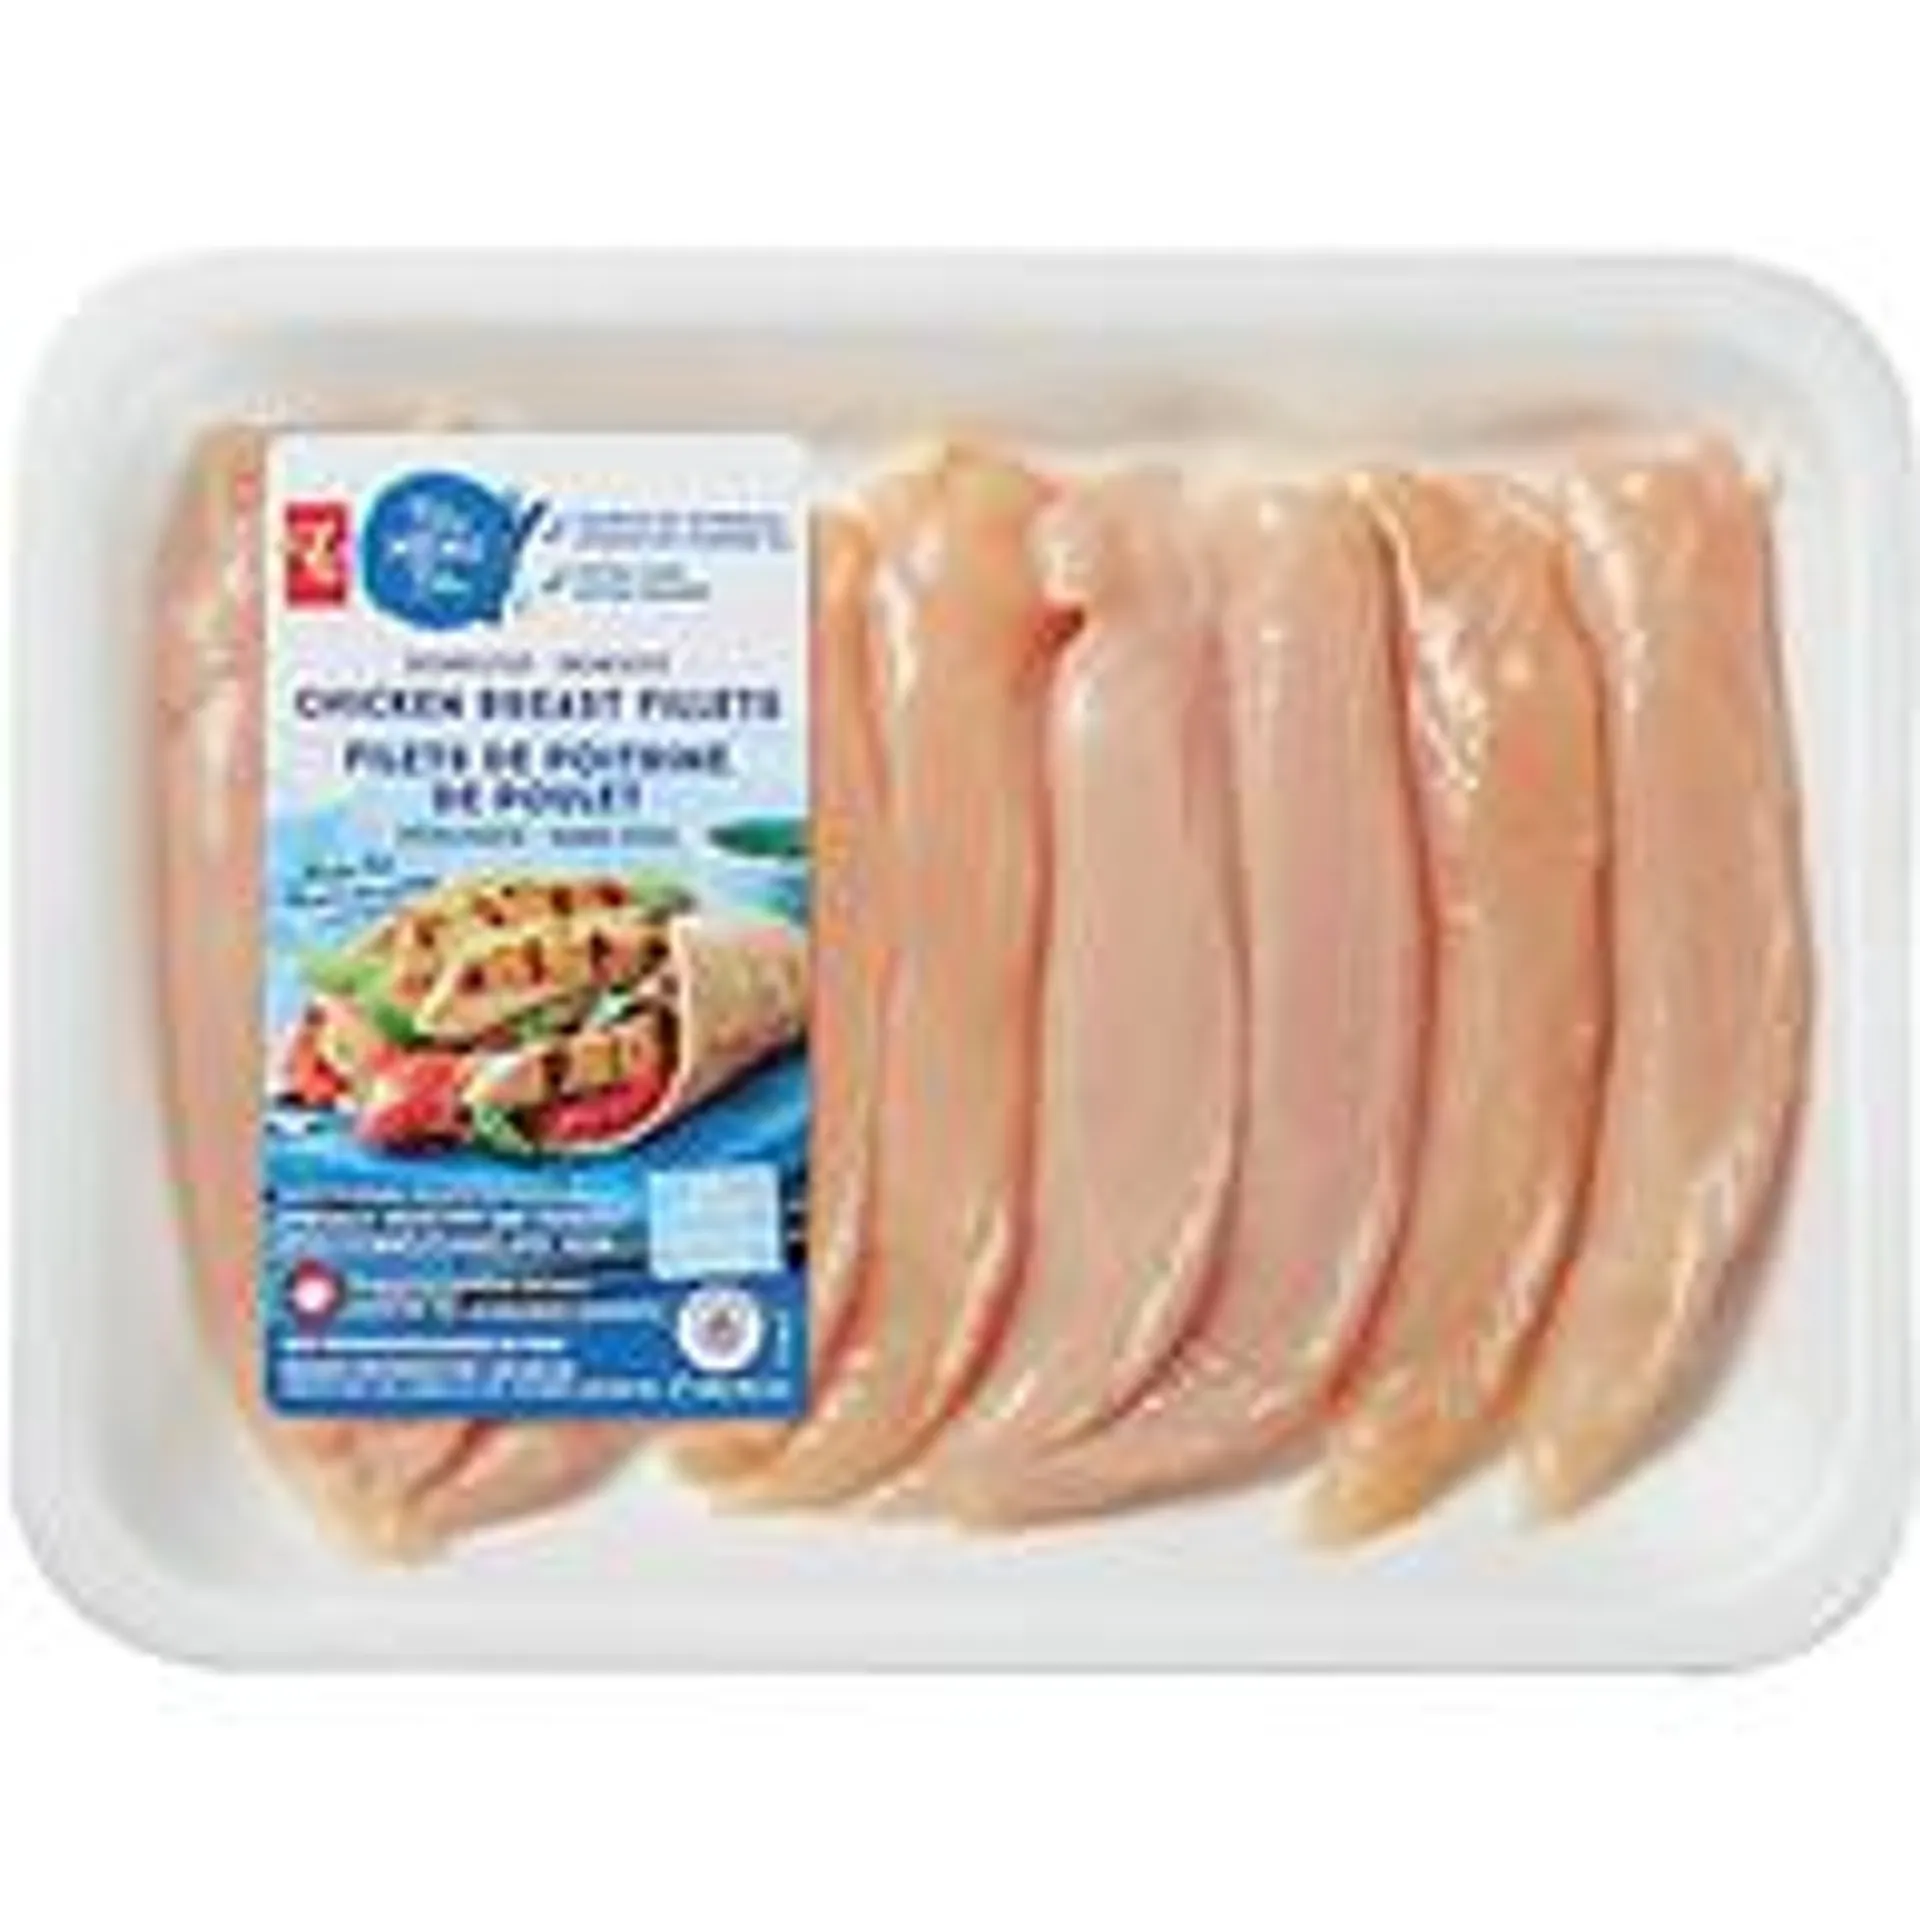 Air Chilled Chicken Breast Fillets, Boneless, Skinless